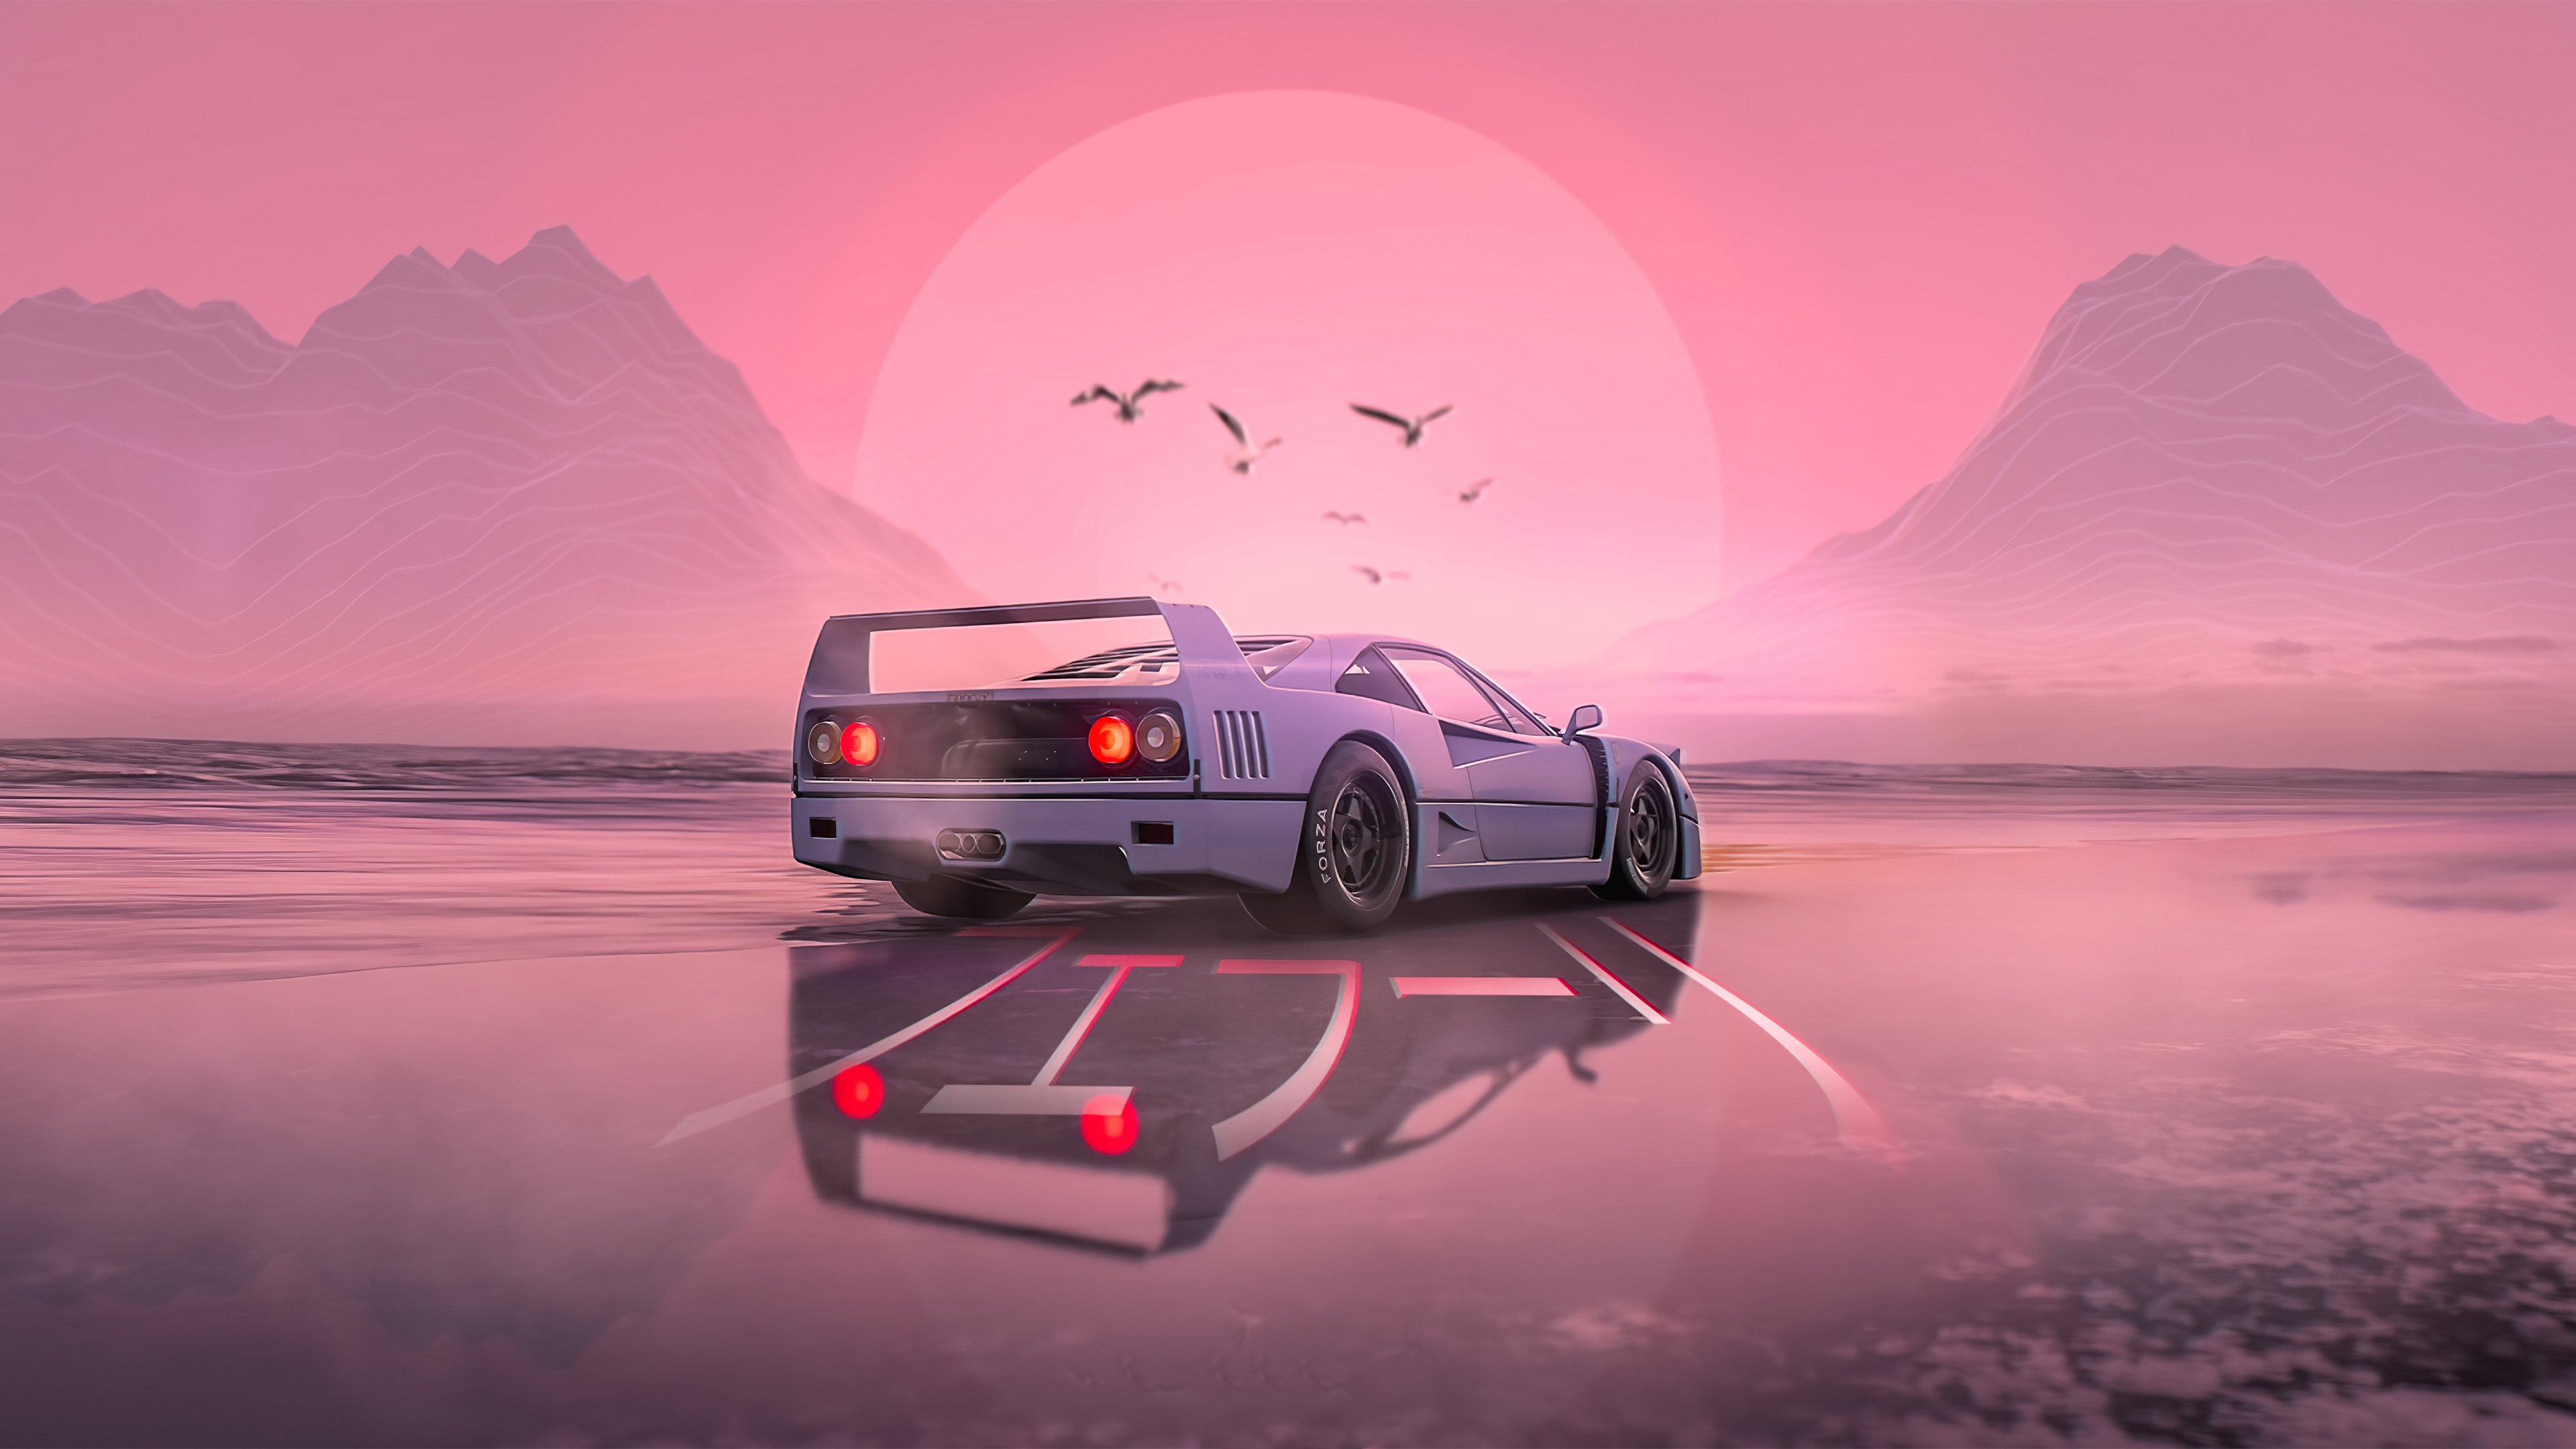 The Cars Wallpapers